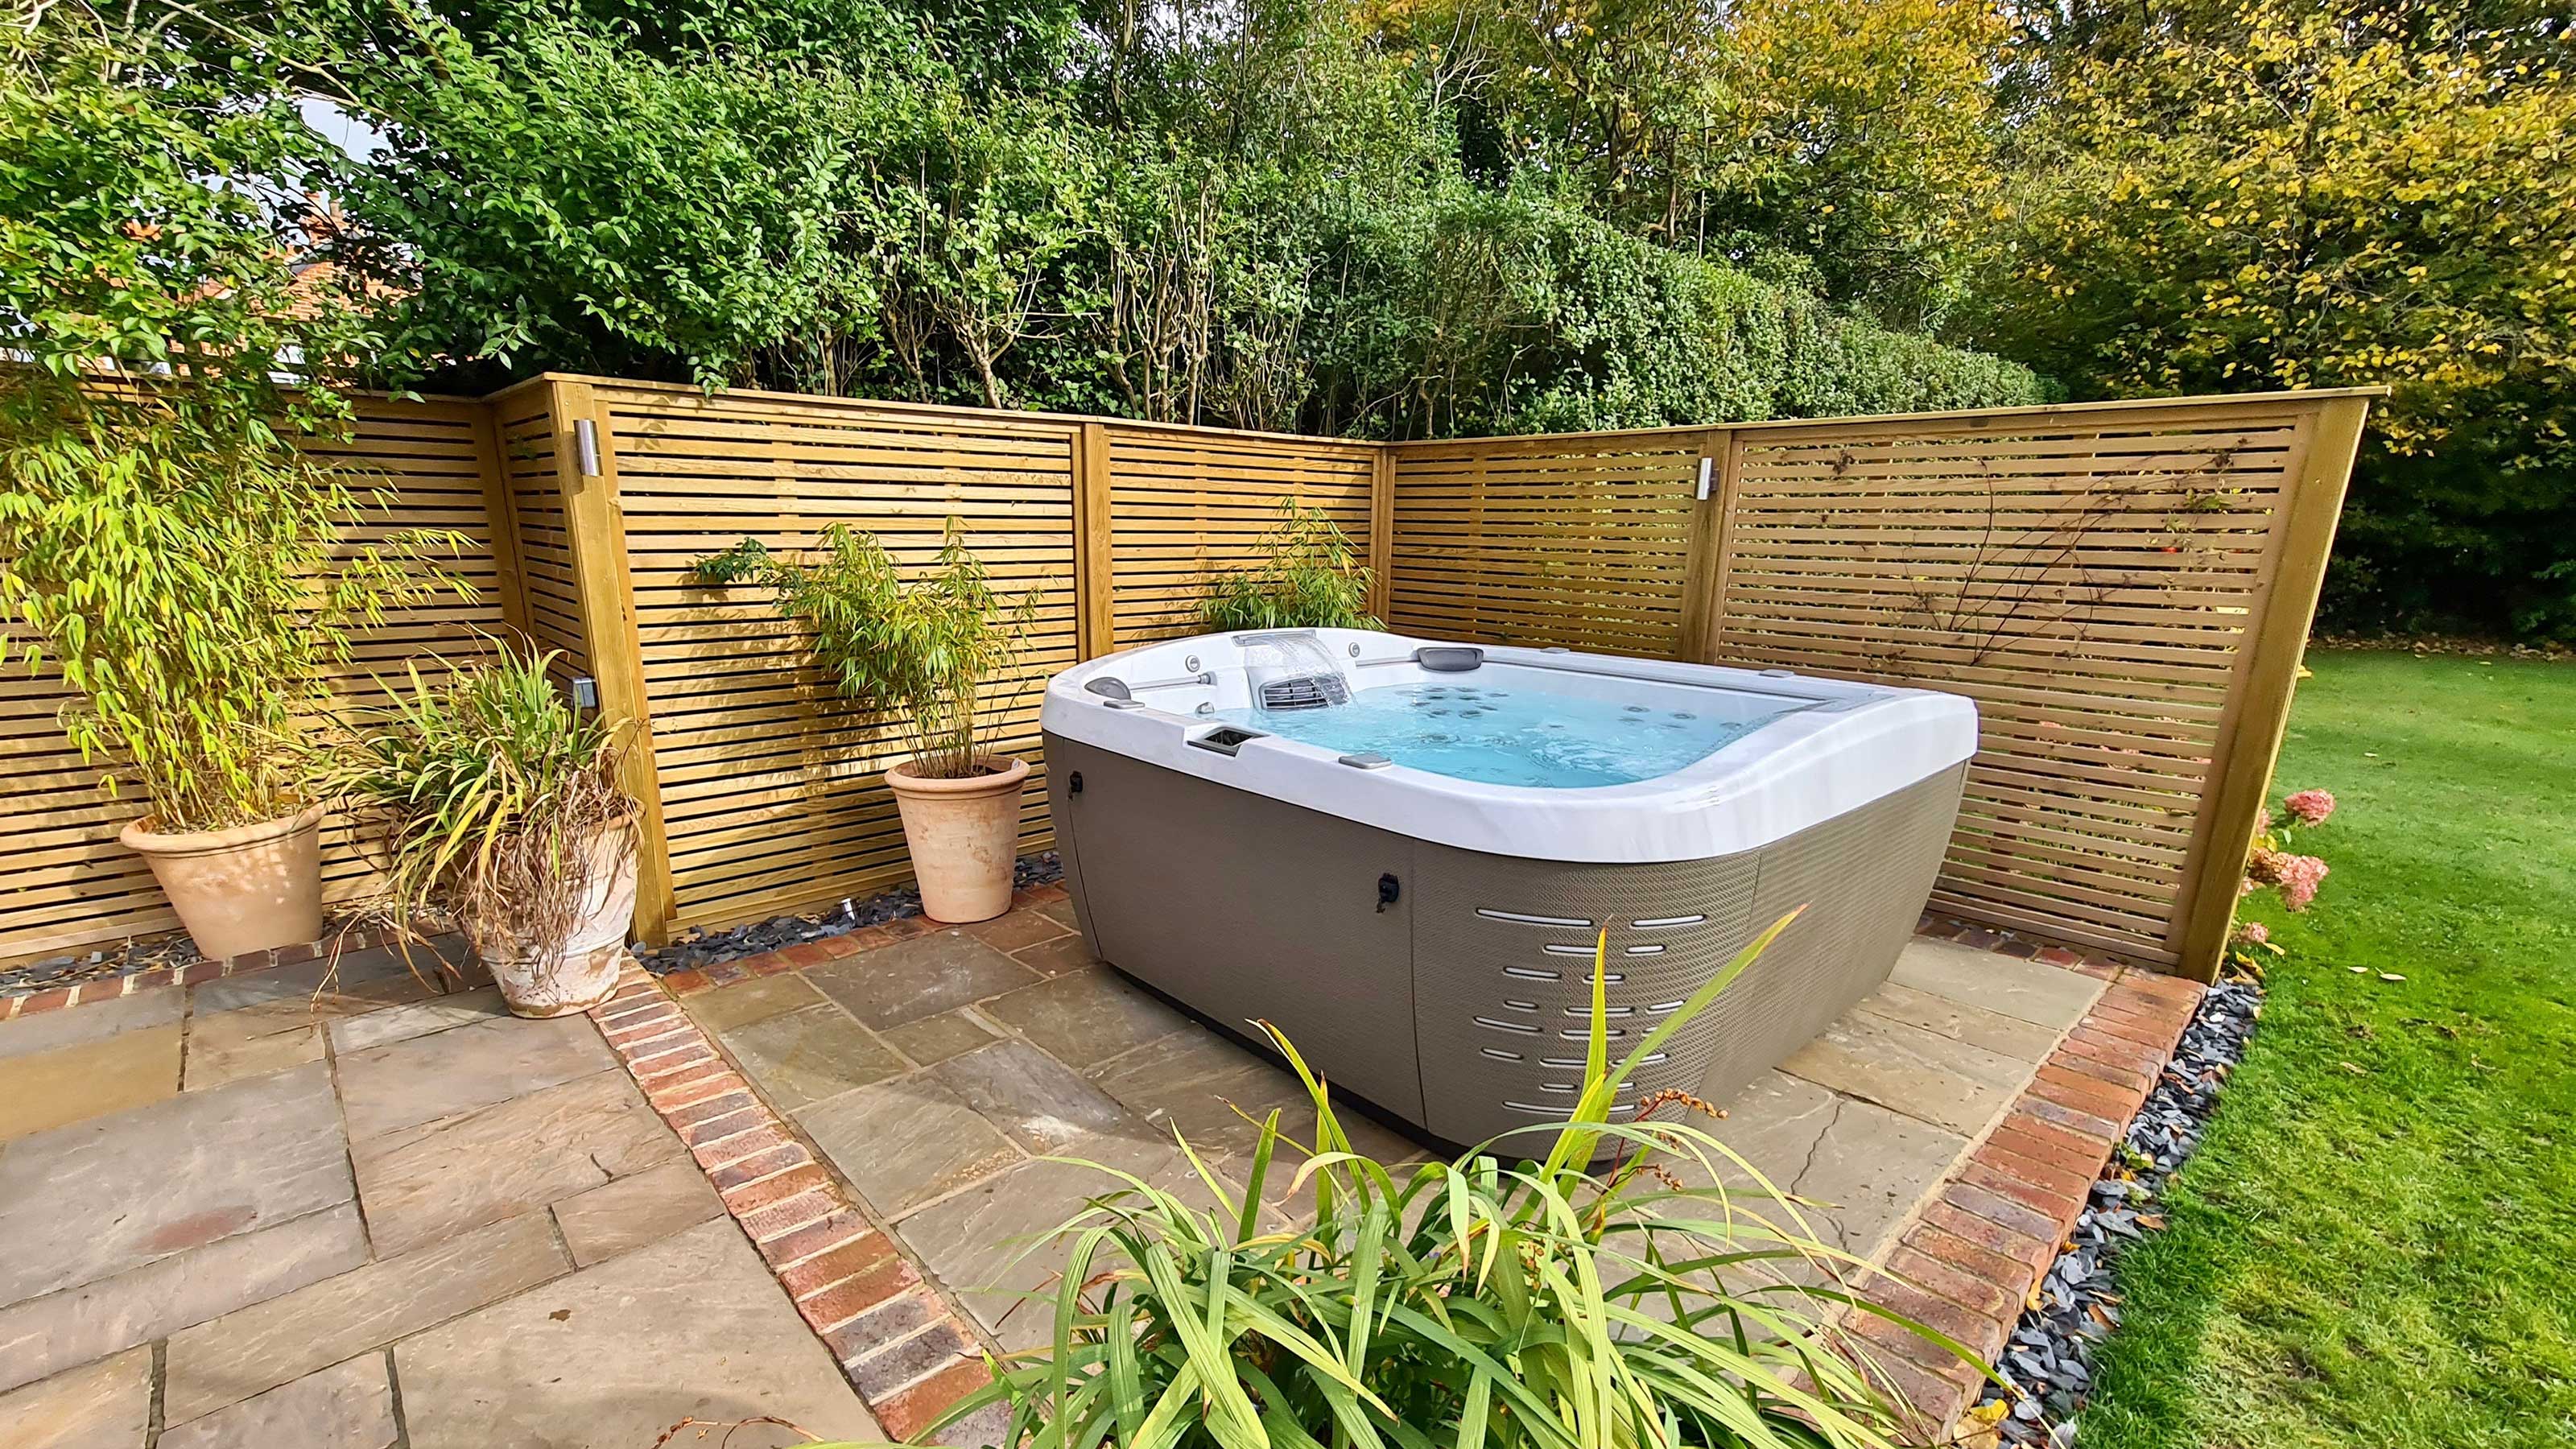 Why Backyard Hot Tub Privacy Succeeds